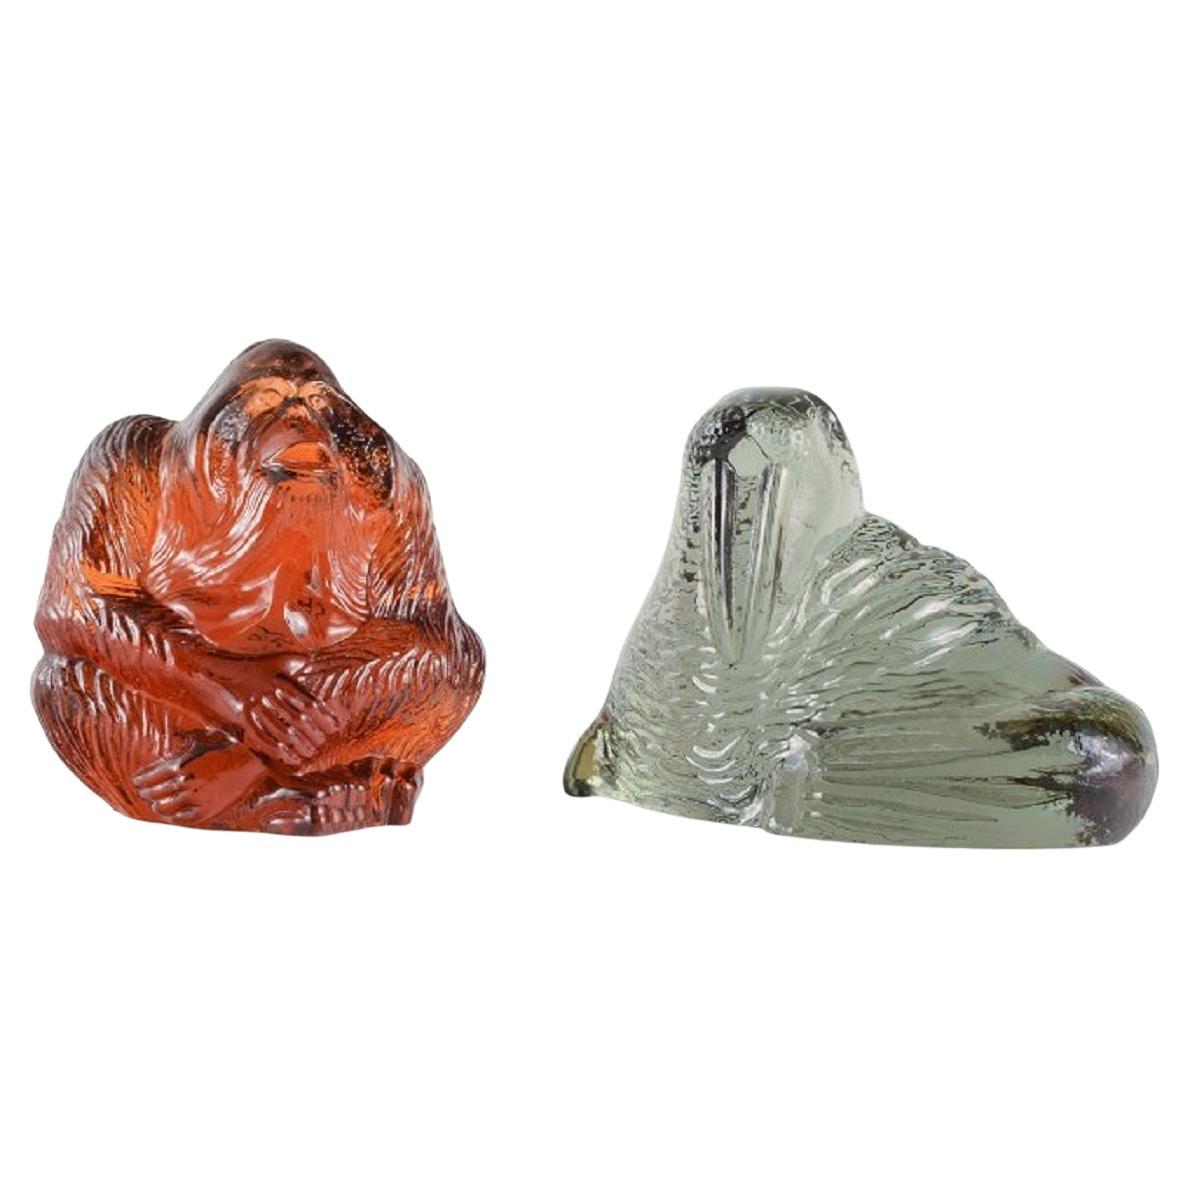 Paul Hoff for Swedish Glass, Two Figures of an Orangutan and a Walrus For Sale